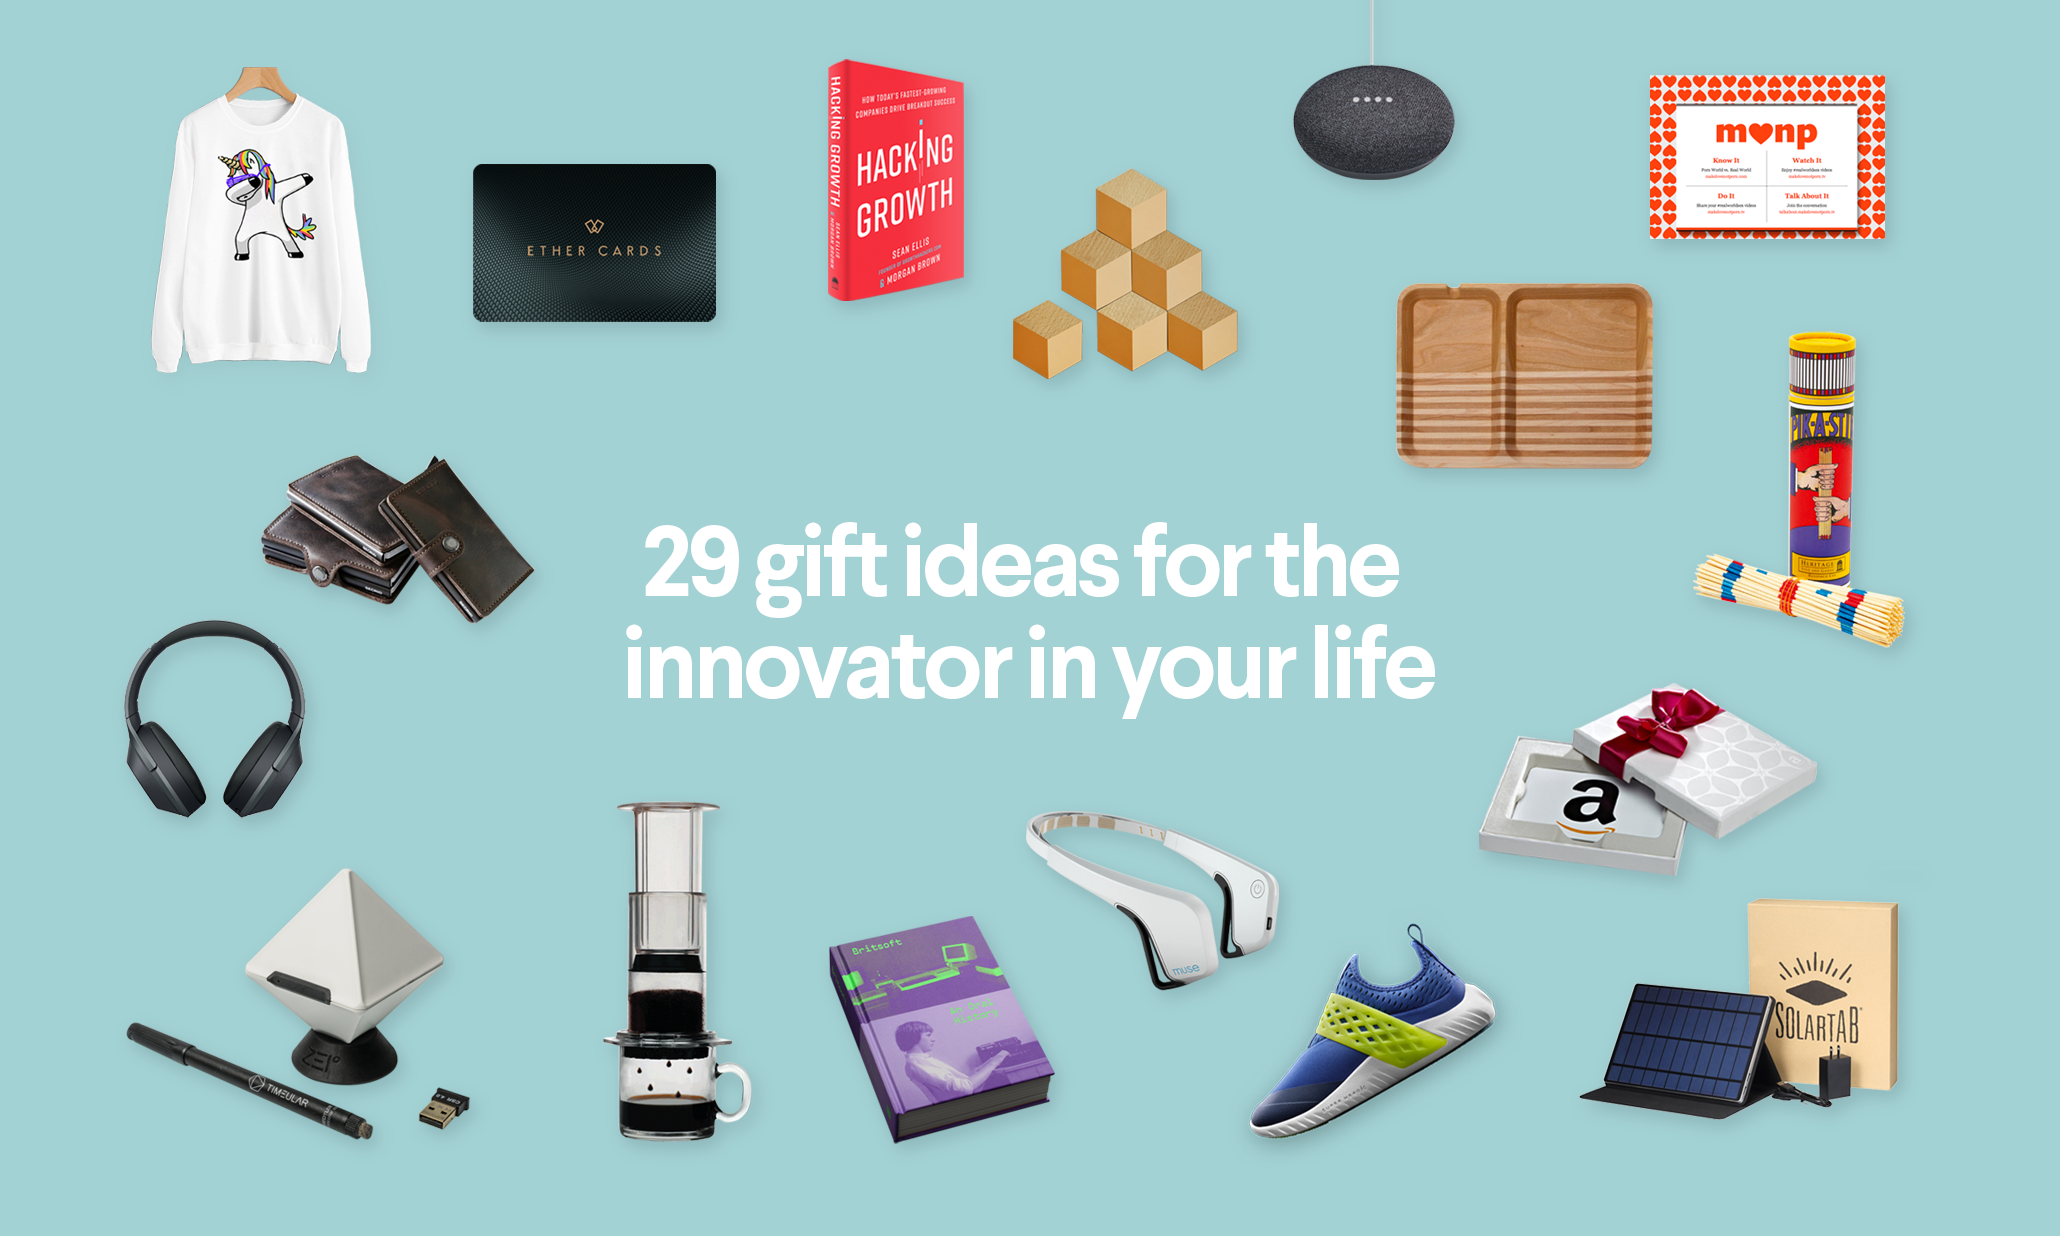 54 Gifts for People Who Have Everything - Unique Gift Ideas